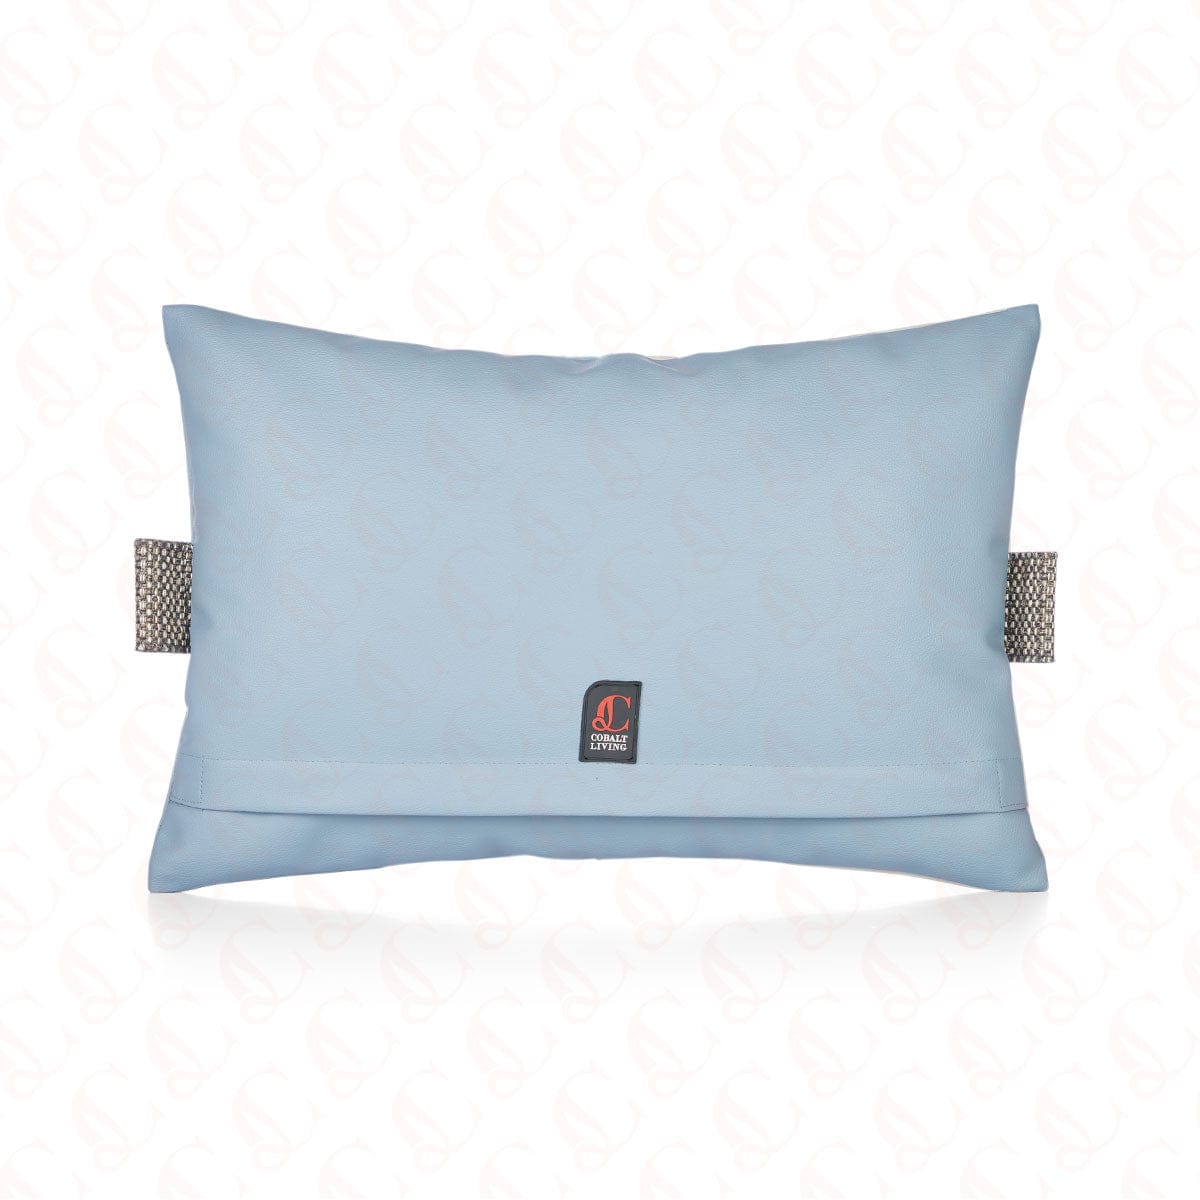 Loophole Cushion Cover Online